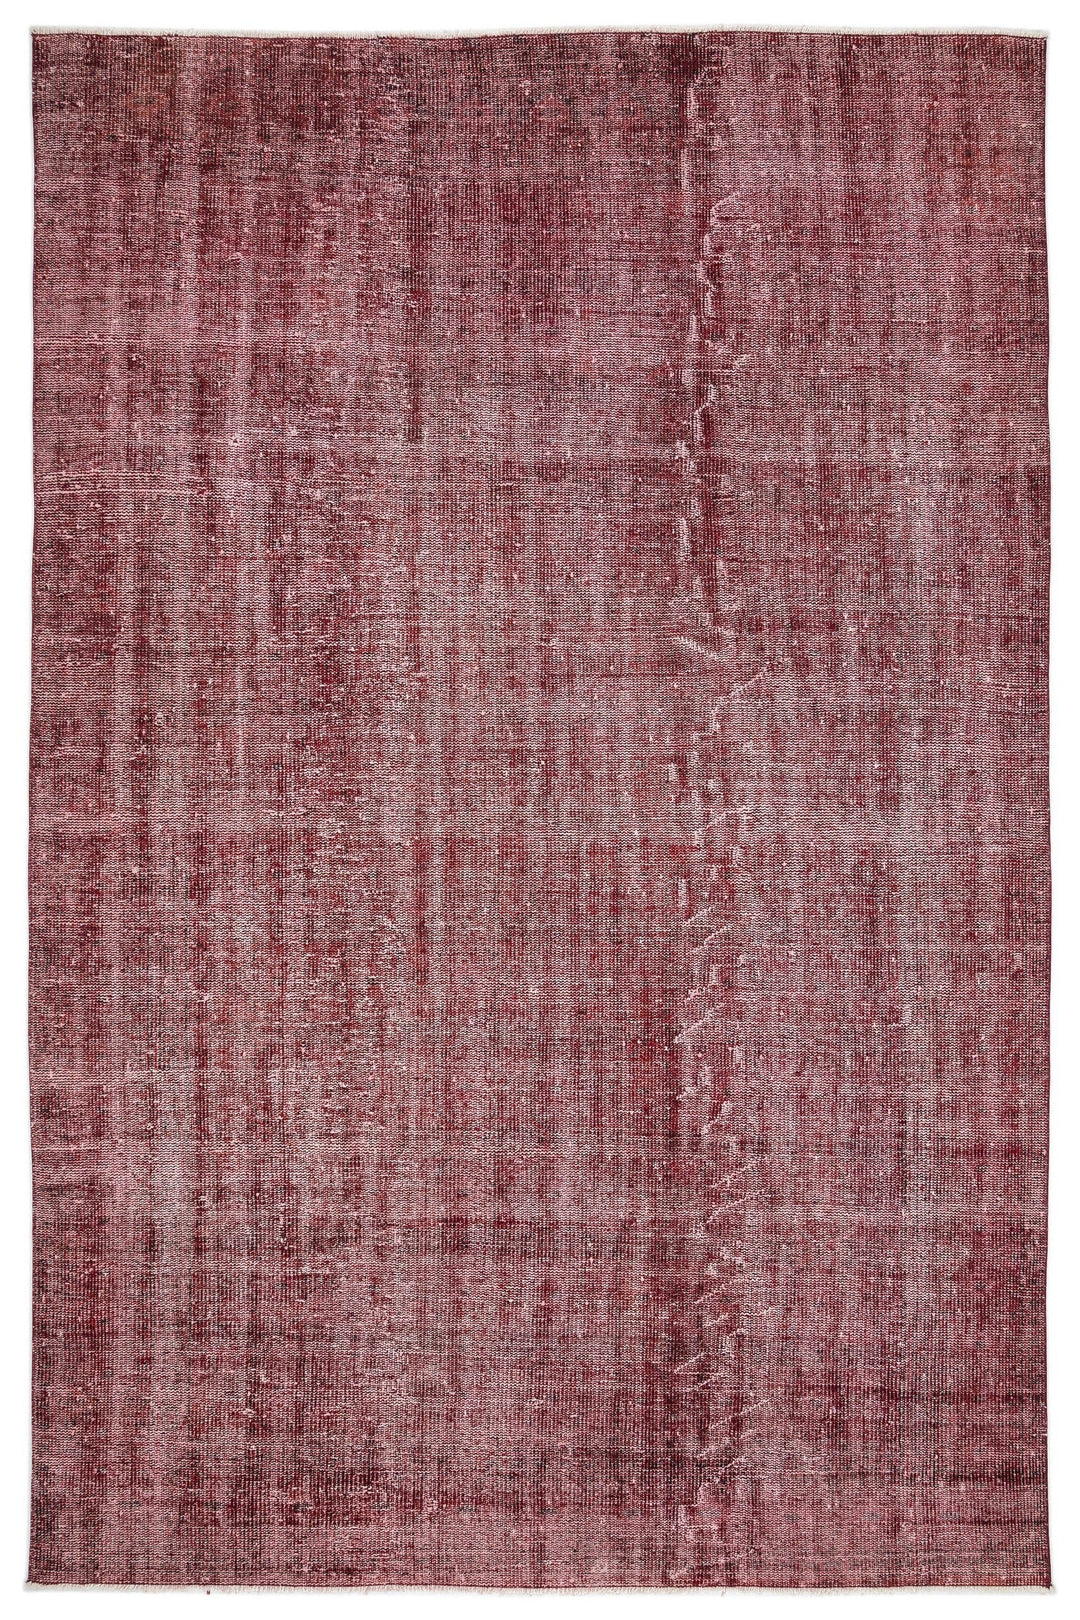 Athens Red Tumbled Wool Hand Woven Carpet 194 x 297